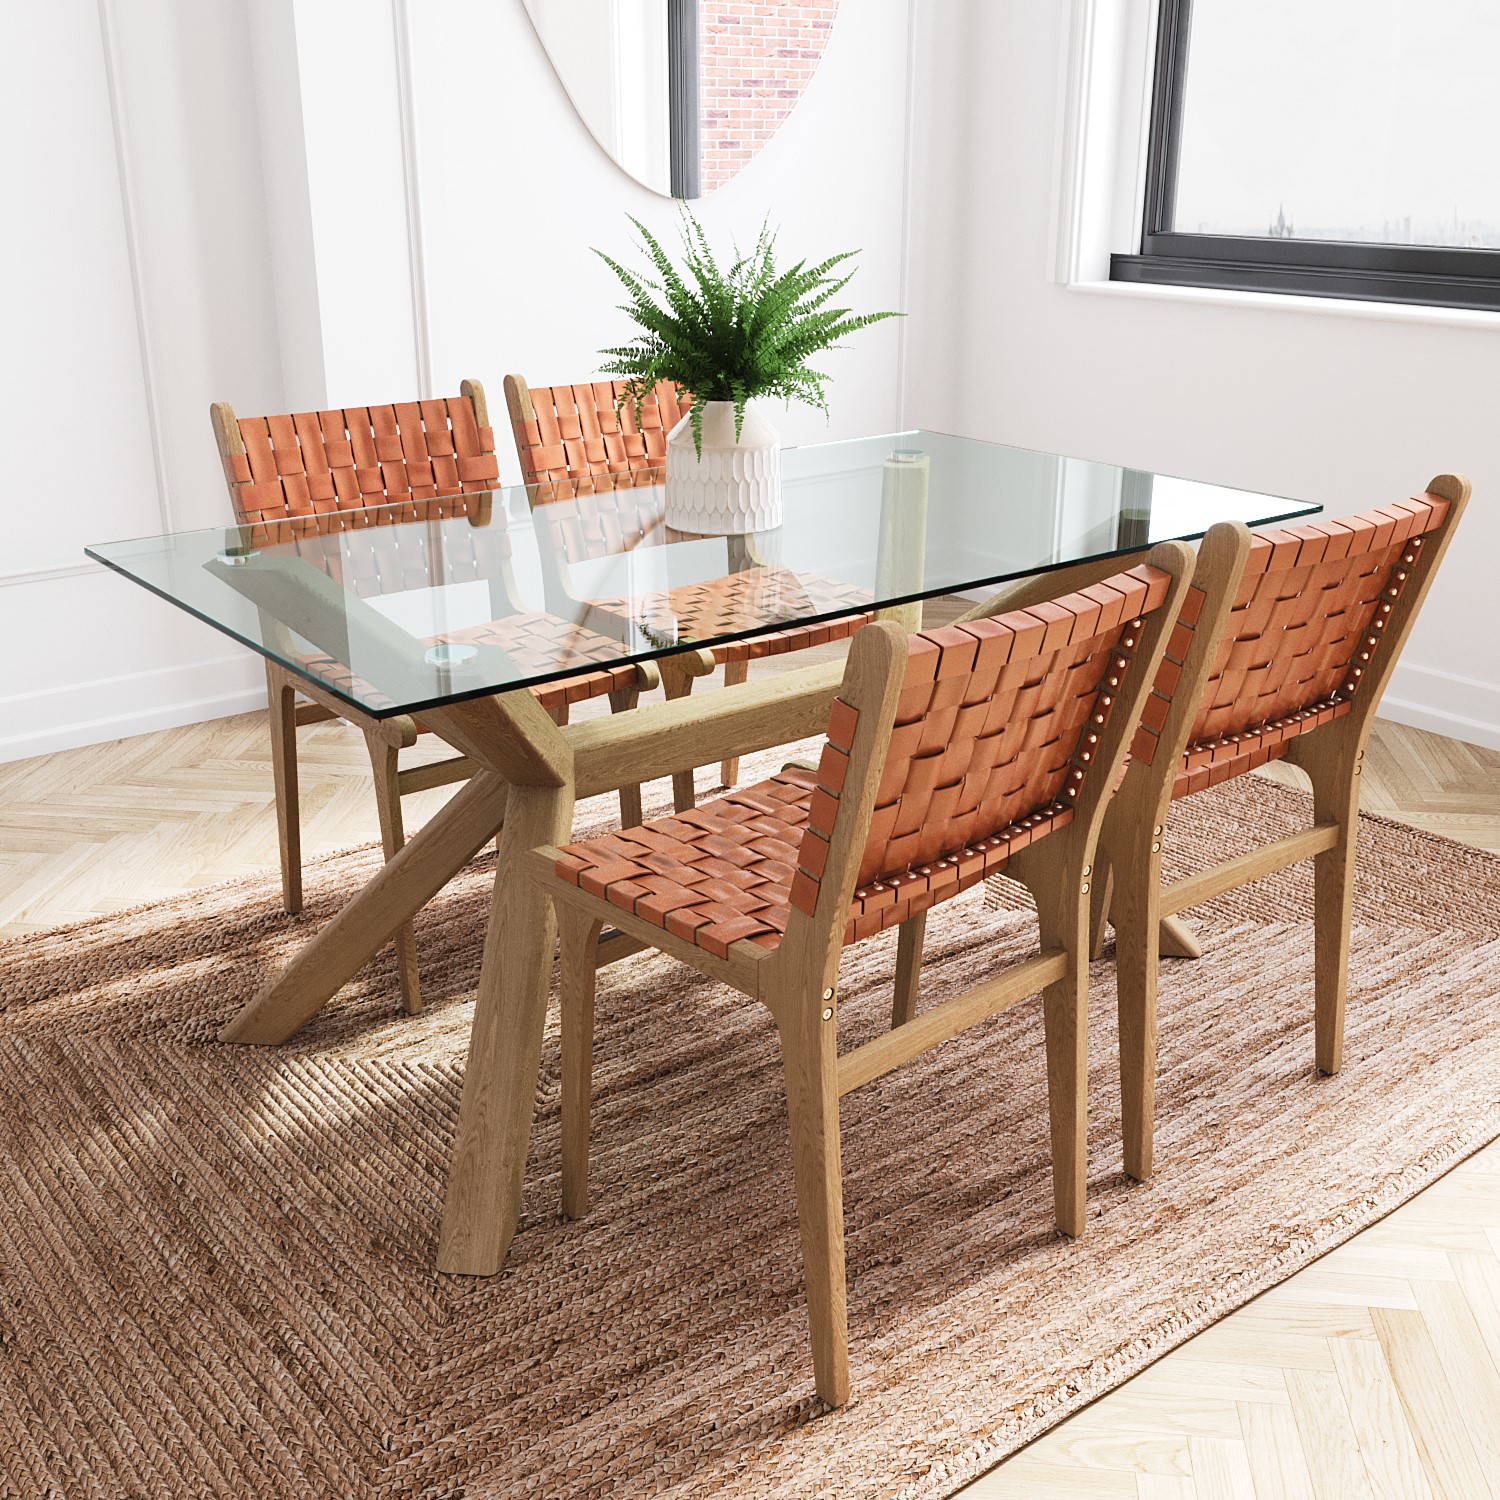 Photo of Rectangle solid oak glass top dining table with 4 tan faux leather dining chairs - nori